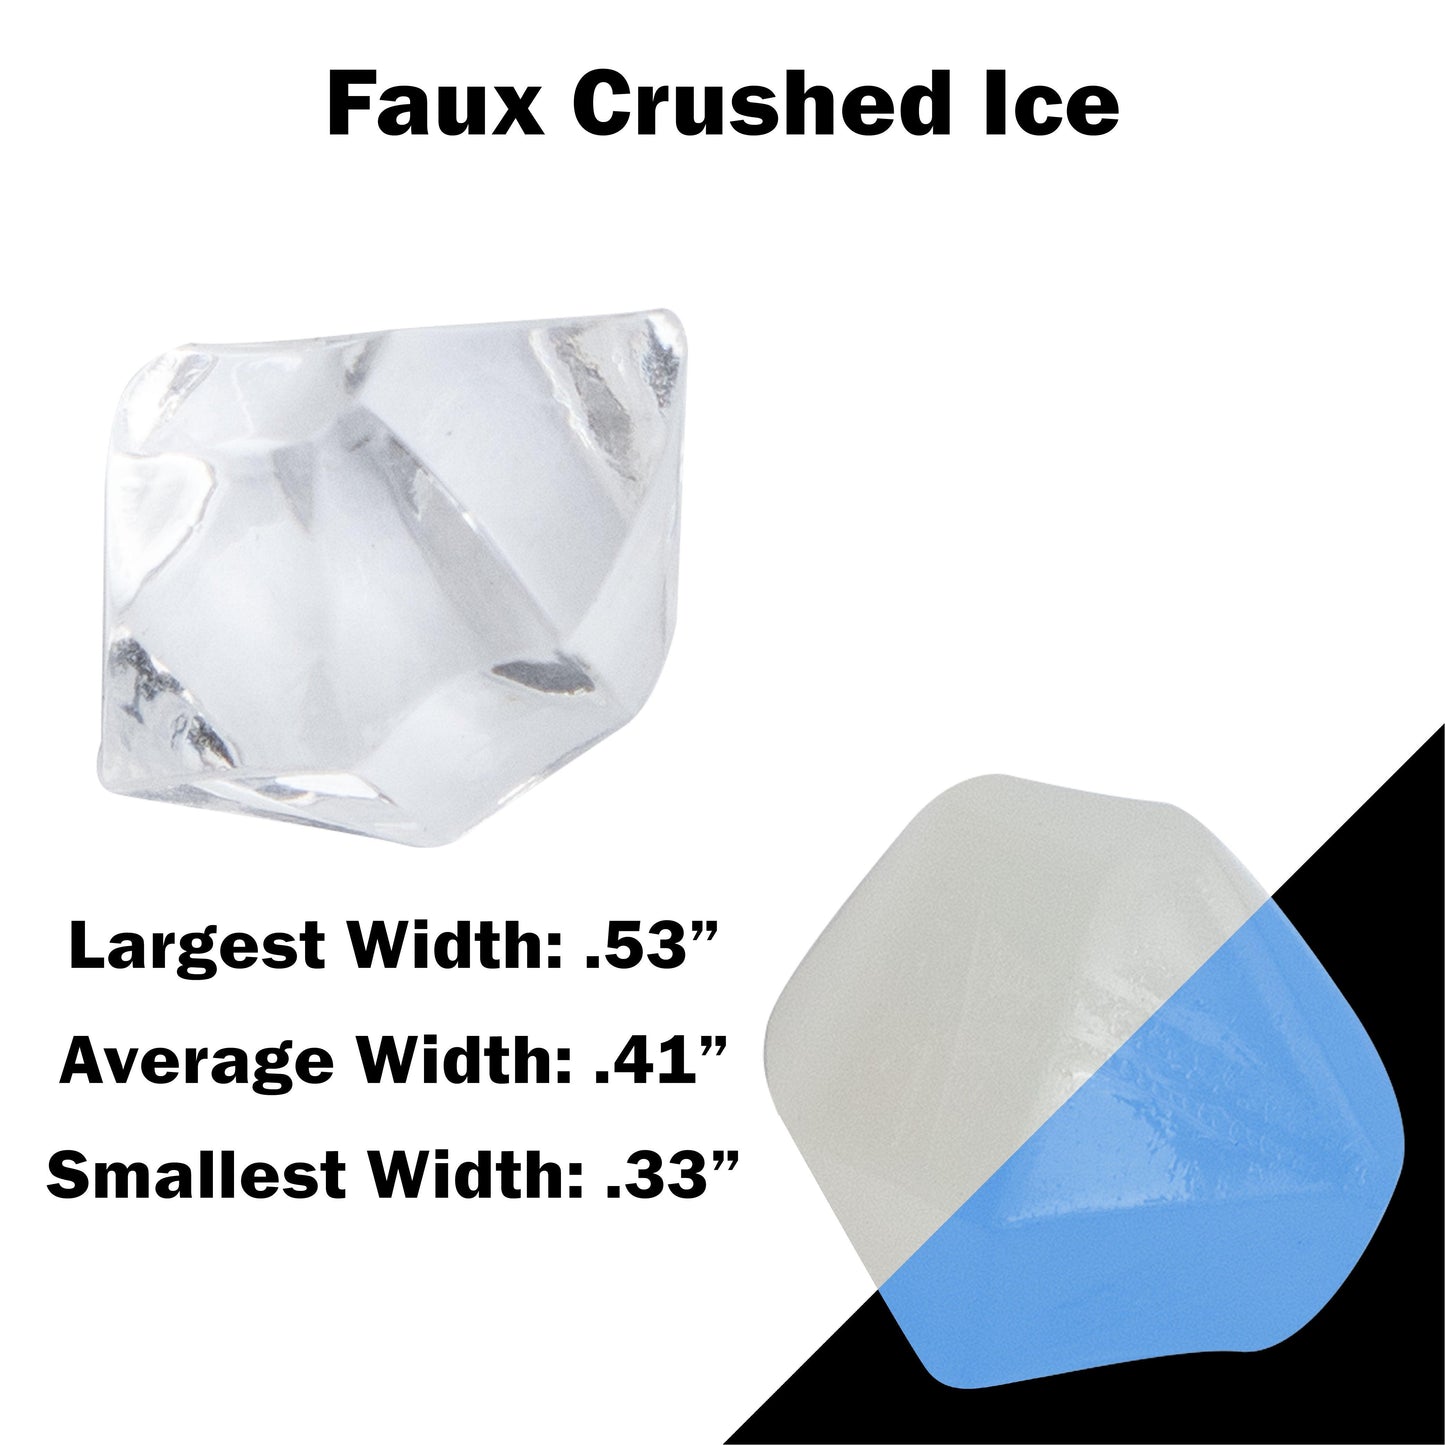 Faux Crushed Ice